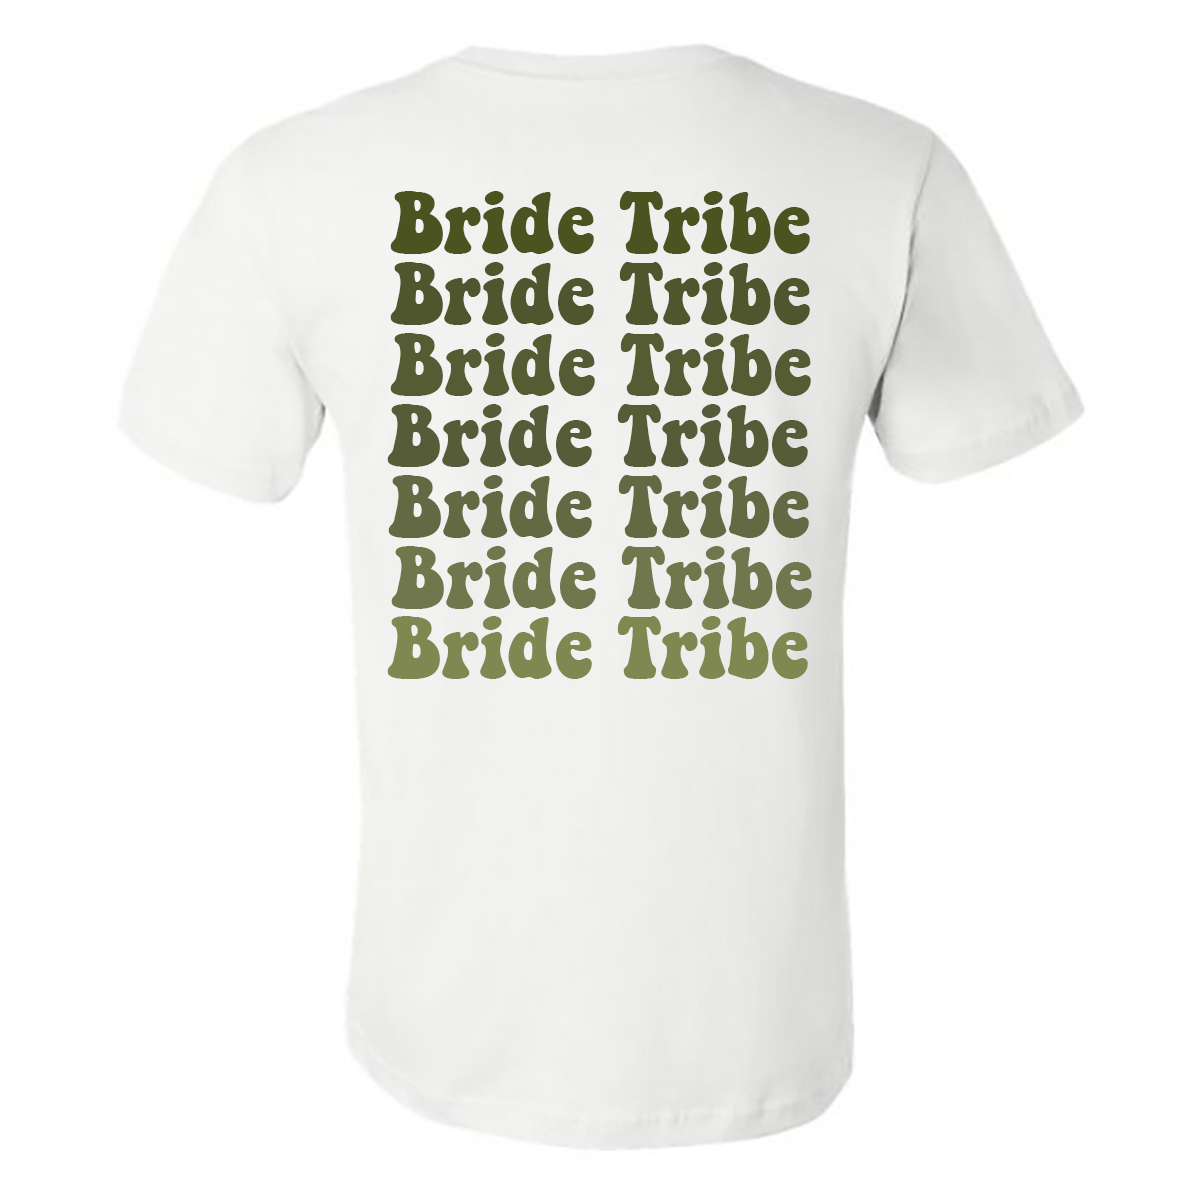 Bride Tribe - Bride (White Tee) - Southern Grace Creations